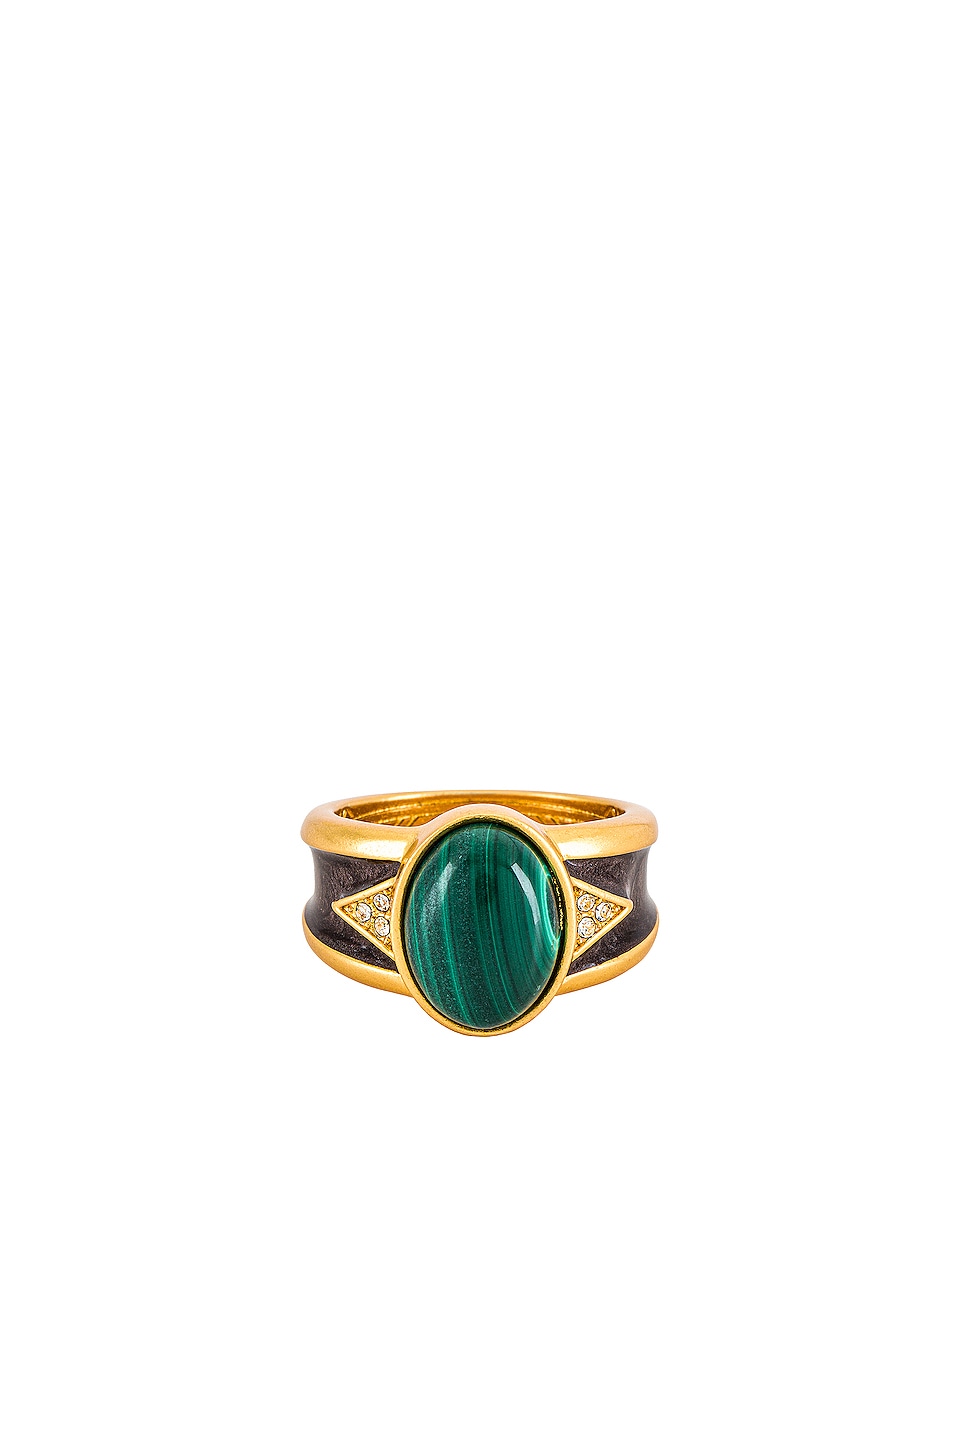 House of Harlow 1960 Malachite Cigar Band Ring in Gold